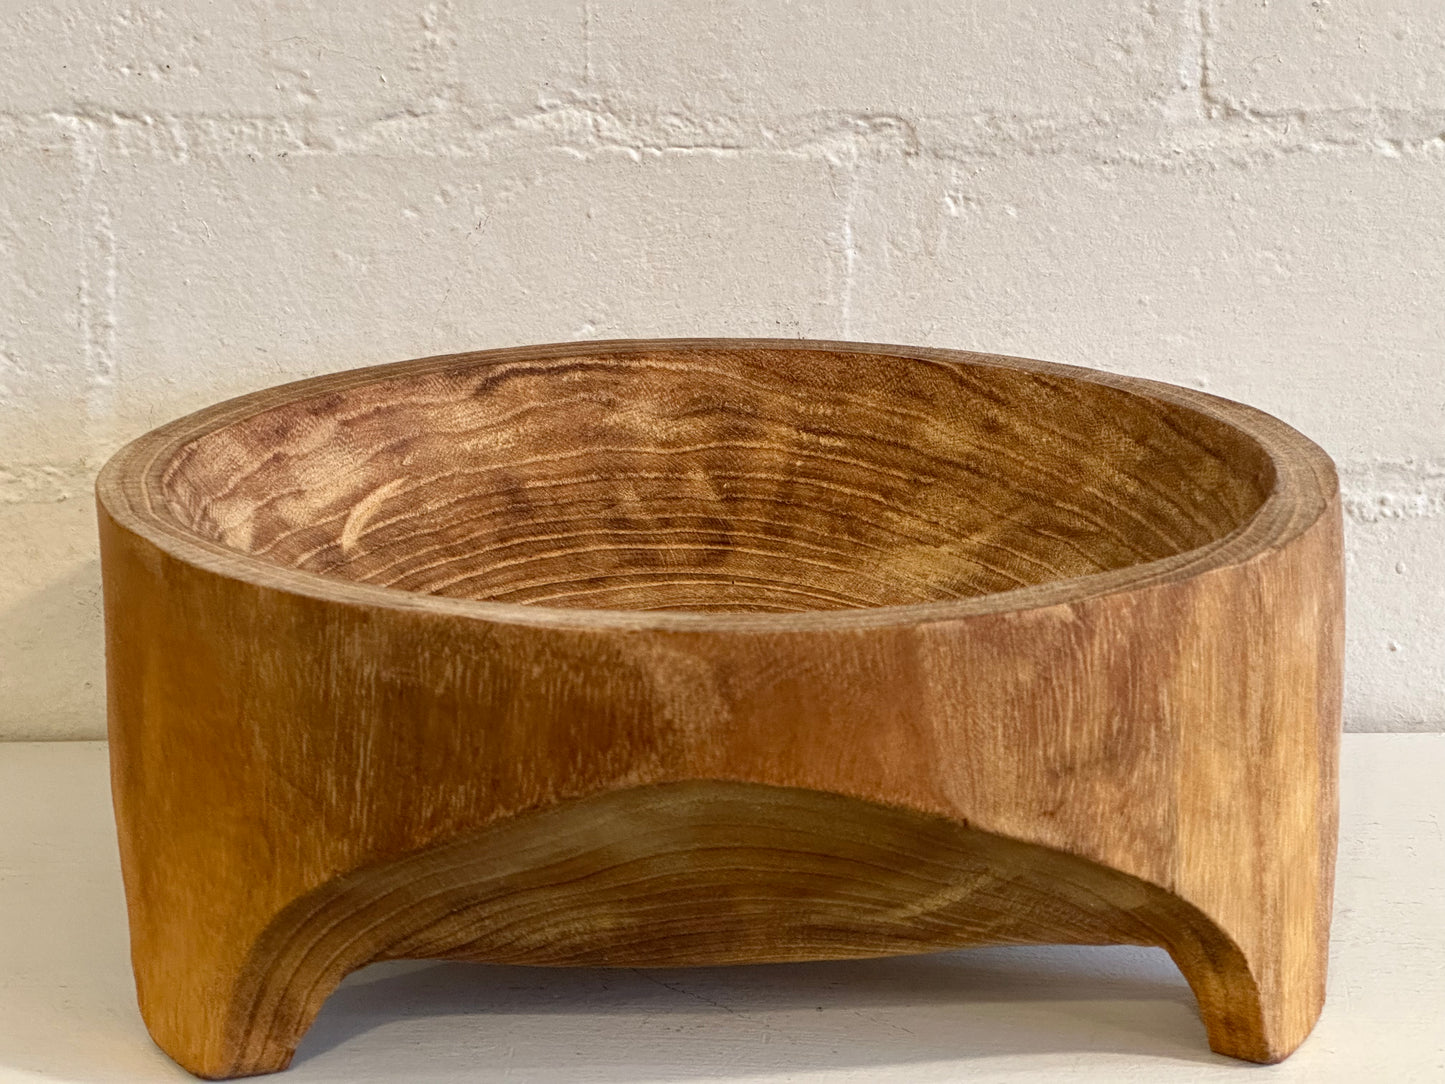 WOODEN BOWL TRAY WITH LEGS